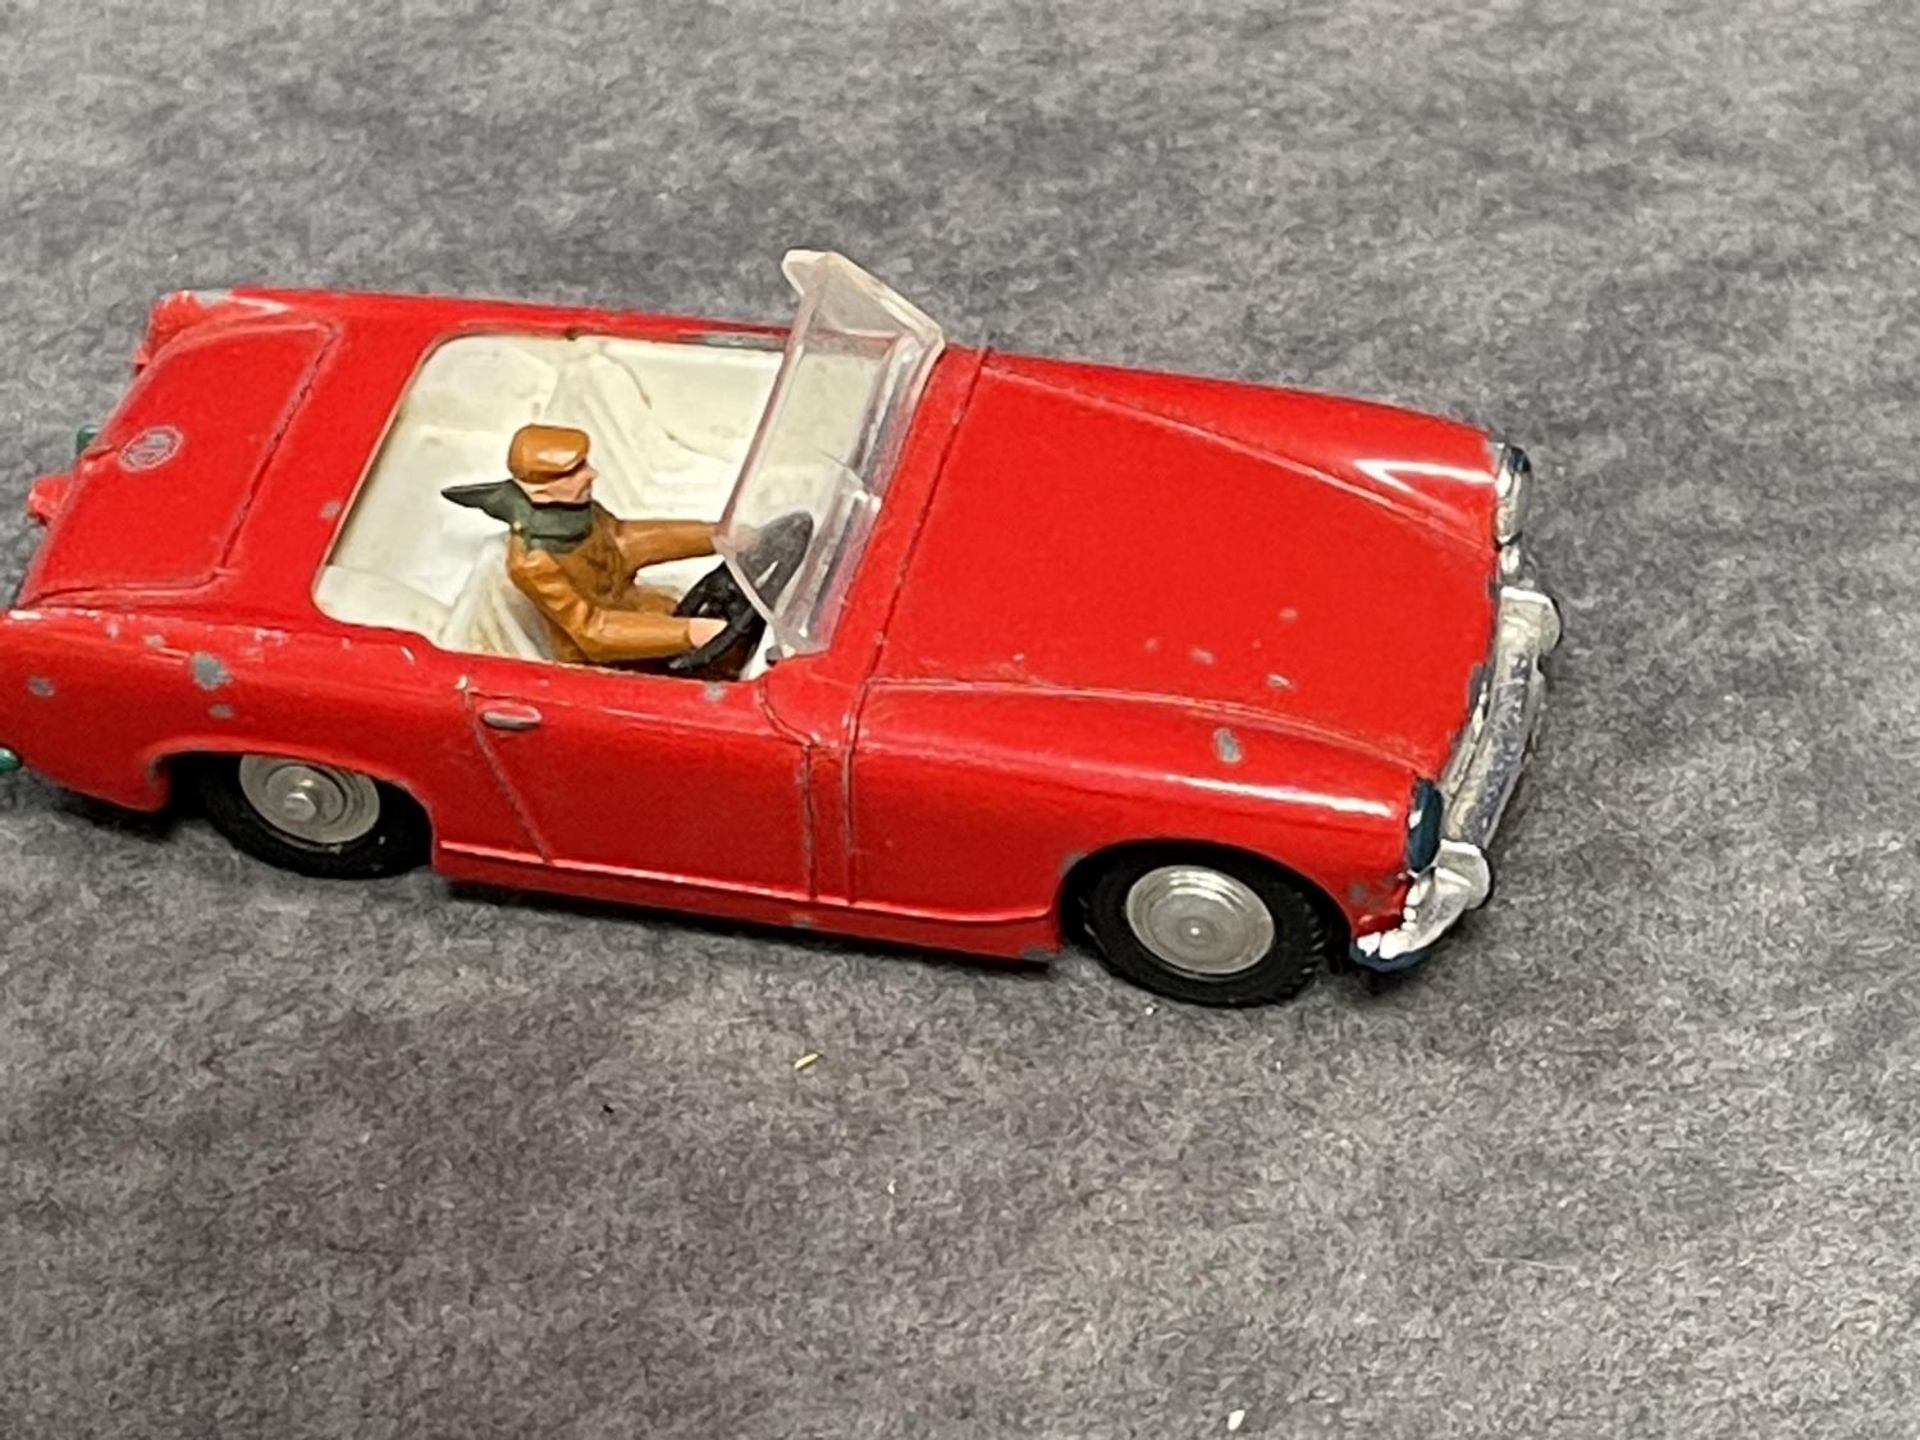 Spot-On #251 MG Midget Mark II In Red Very Good Condition Model A Few Chips Front Number Plate - Image 2 of 4